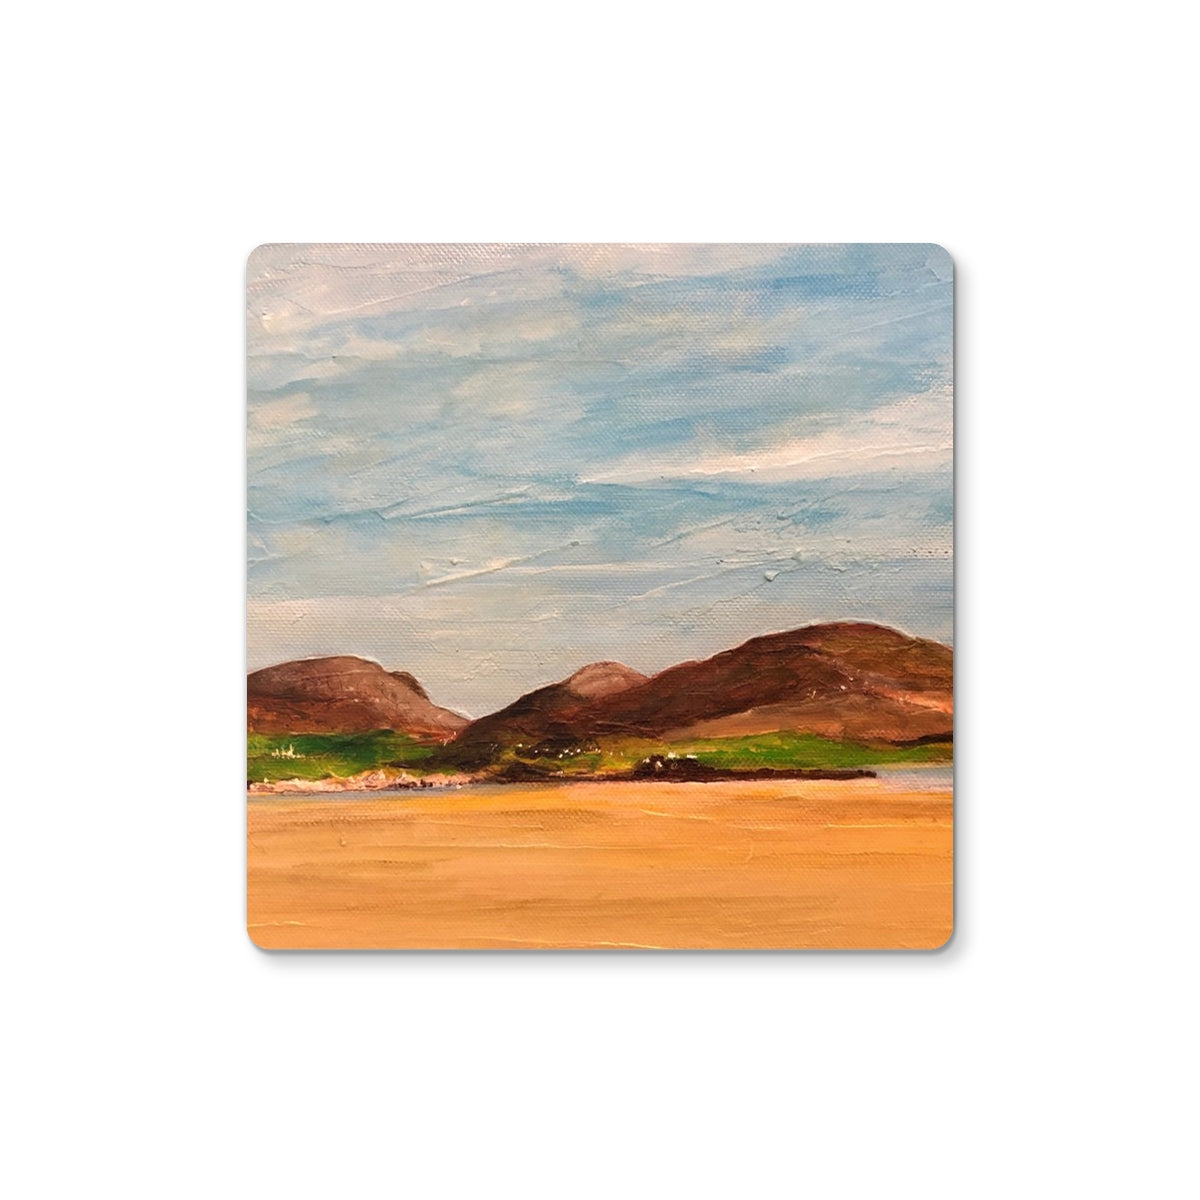 Uig Sands Lewis Art Gifts Coaster-Coasters-Hebridean Islands Art Gallery-2 Coasters-Paintings, Prints, Homeware, Art Gifts From Scotland By Scottish Artist Kevin Hunter